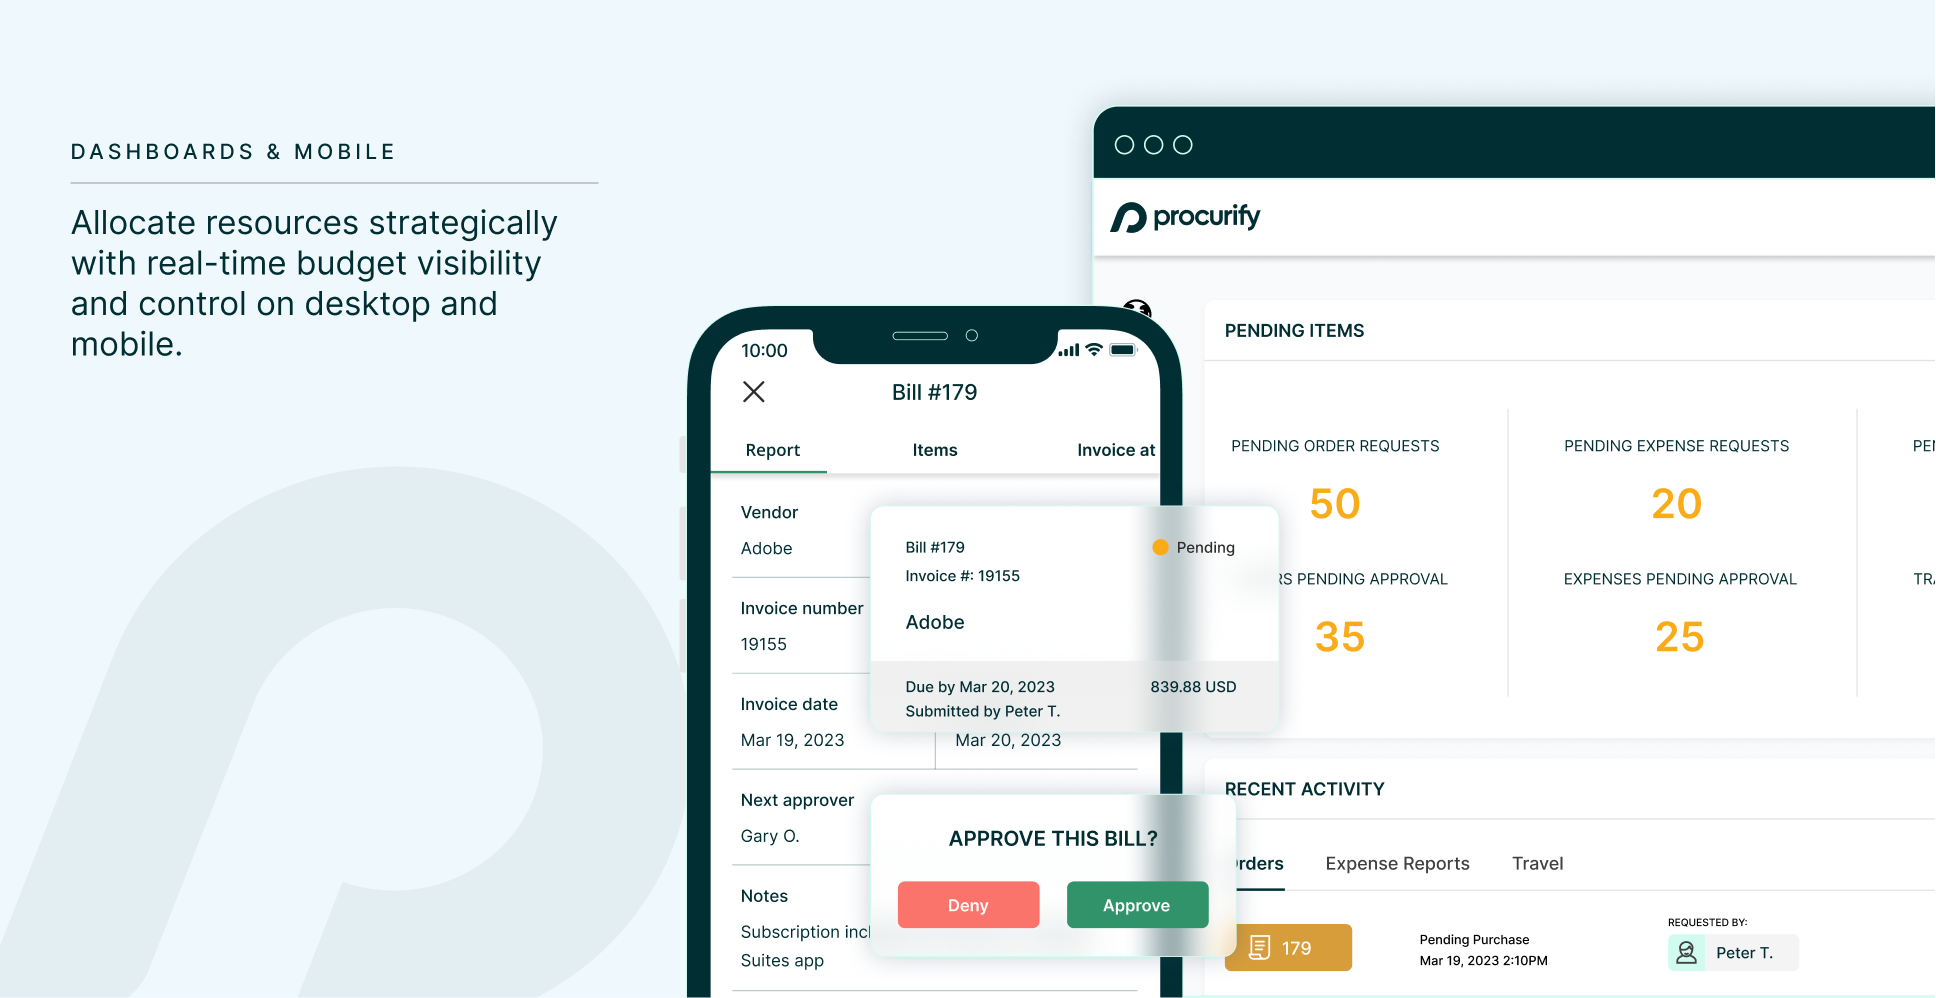 Procurify’s mobile app for iOS and Android gives you complete visibility and control over your end-to-end procurement process – all from your phone.